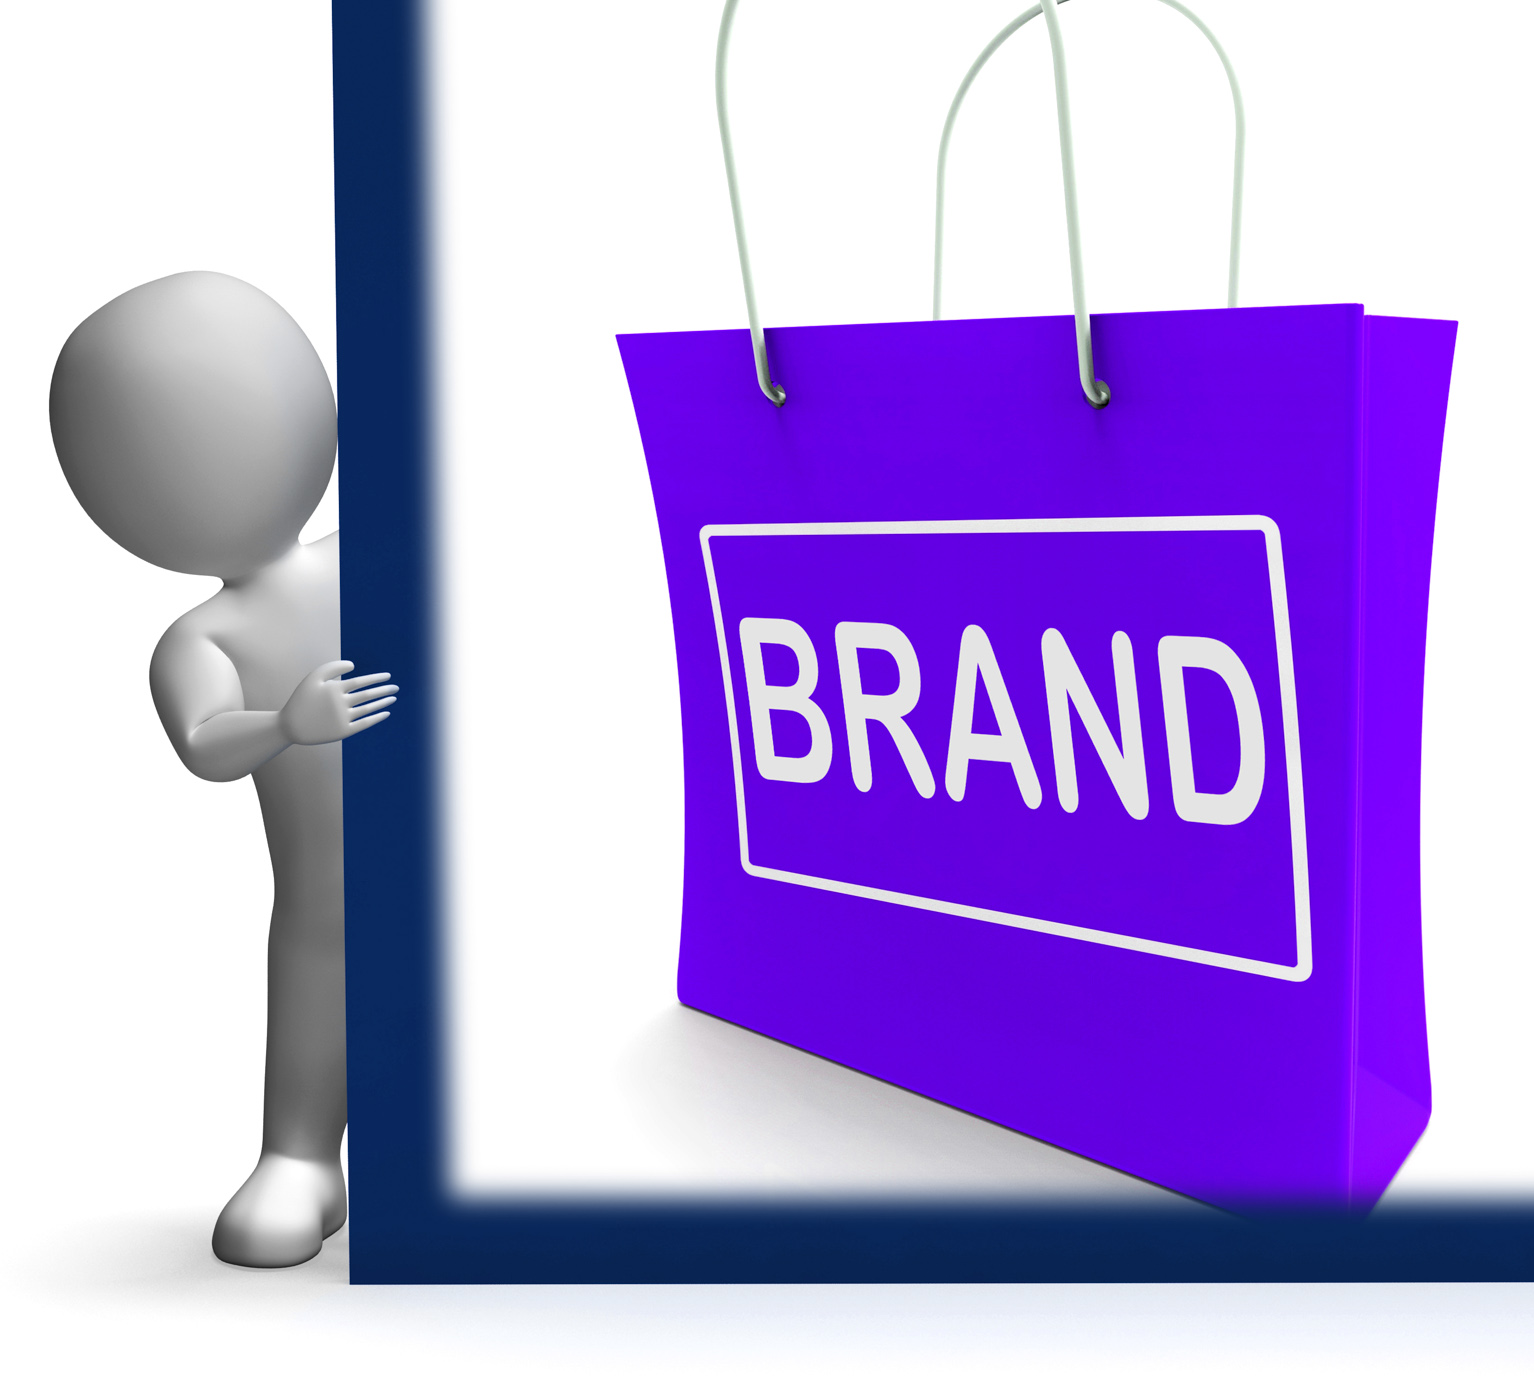 Brand shopping sign shows branding trademark or label photo